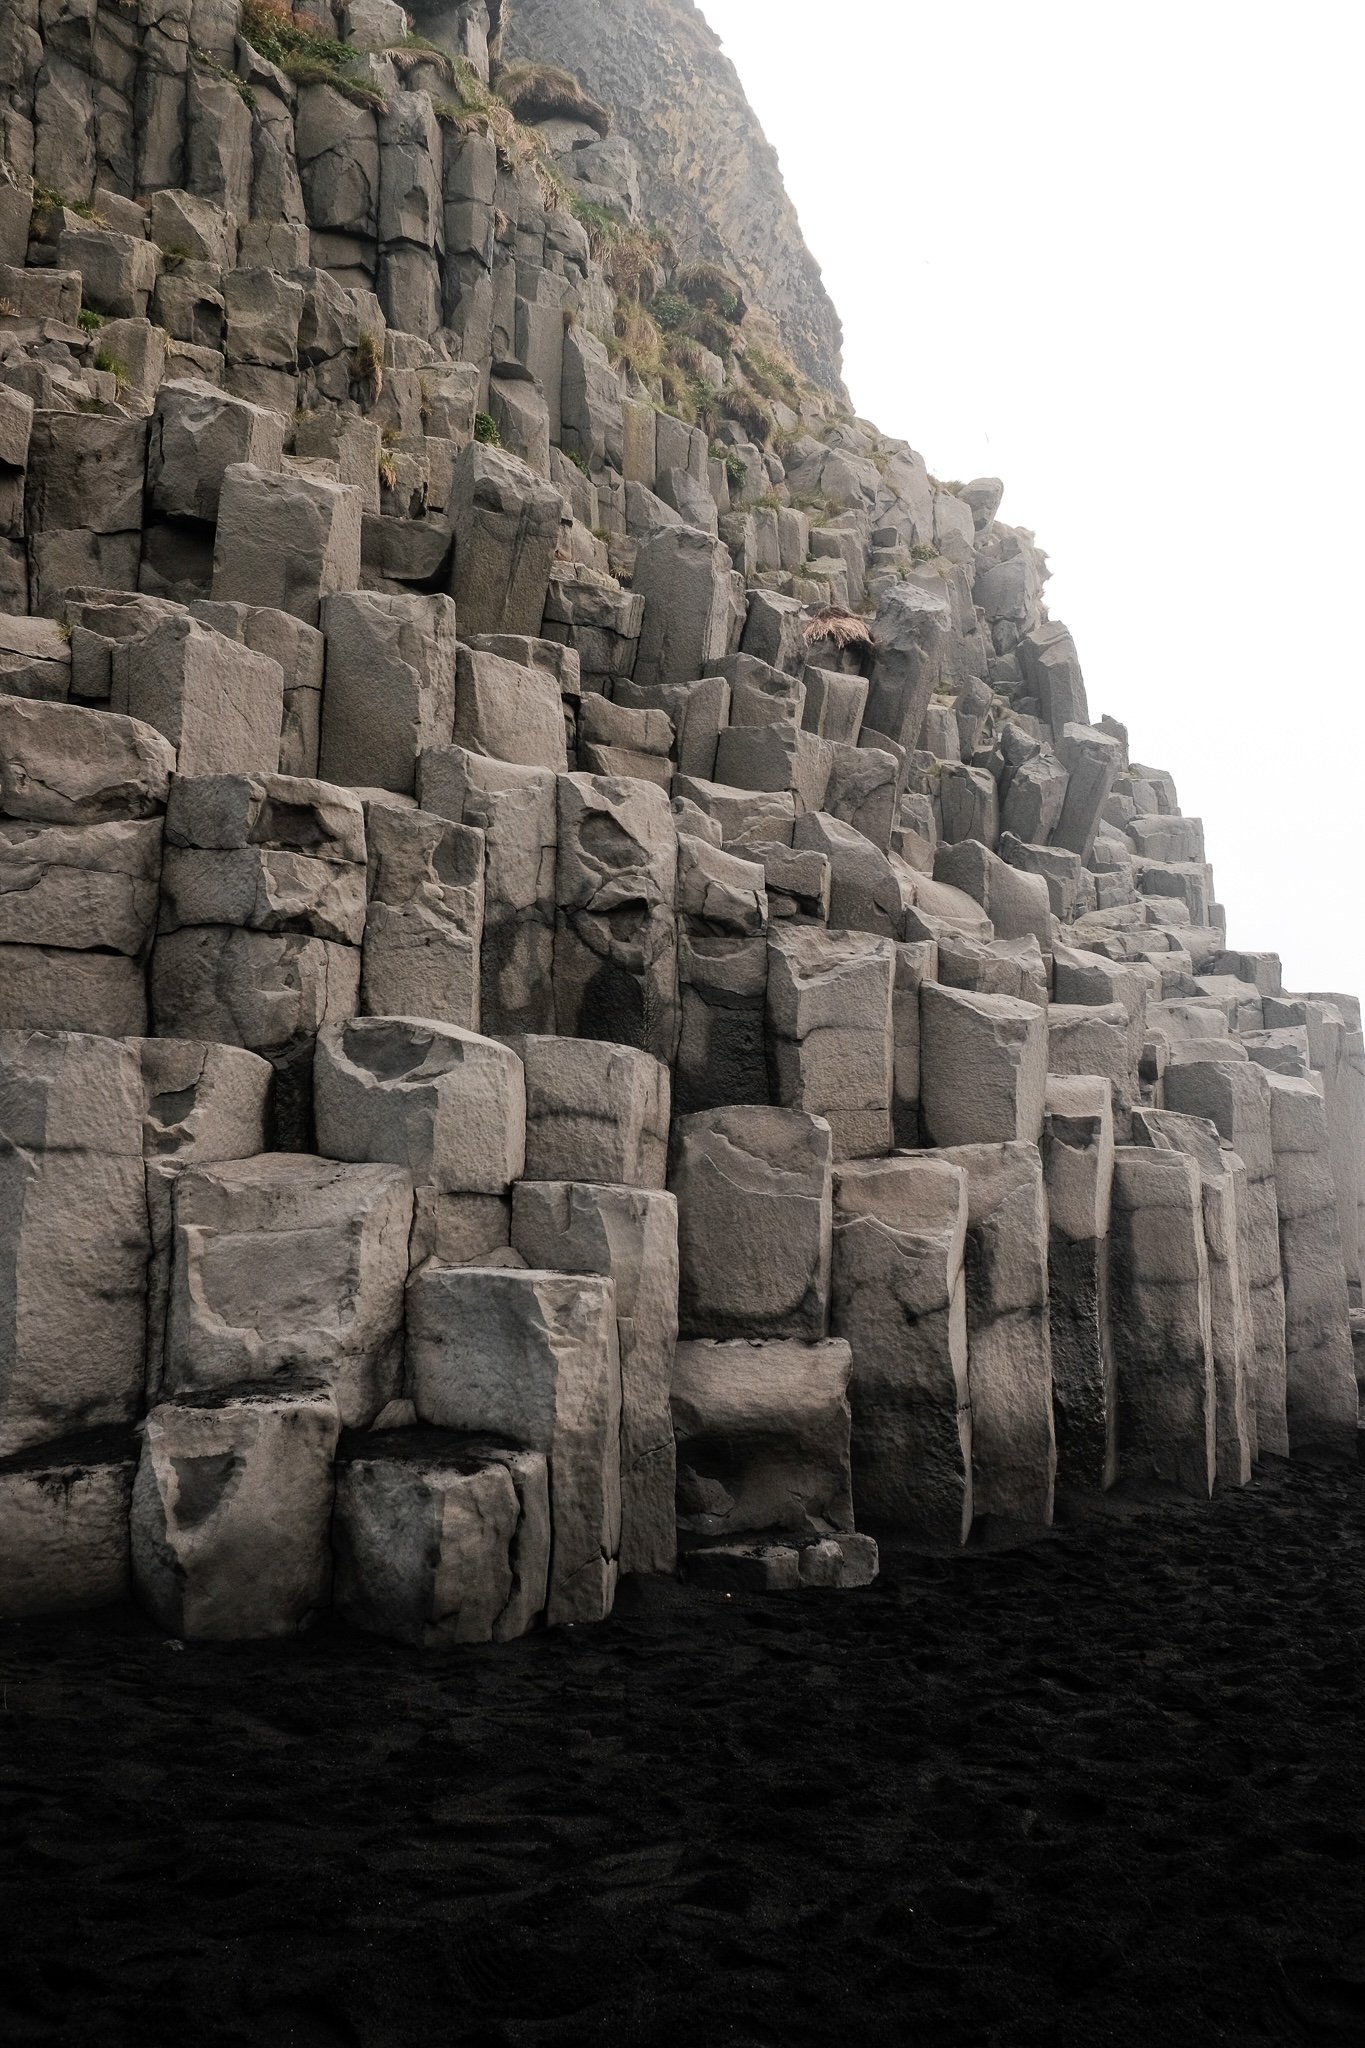 A dirty white basalt rock column formation is the start of the rocky mountain contrasting the black sand of the beach